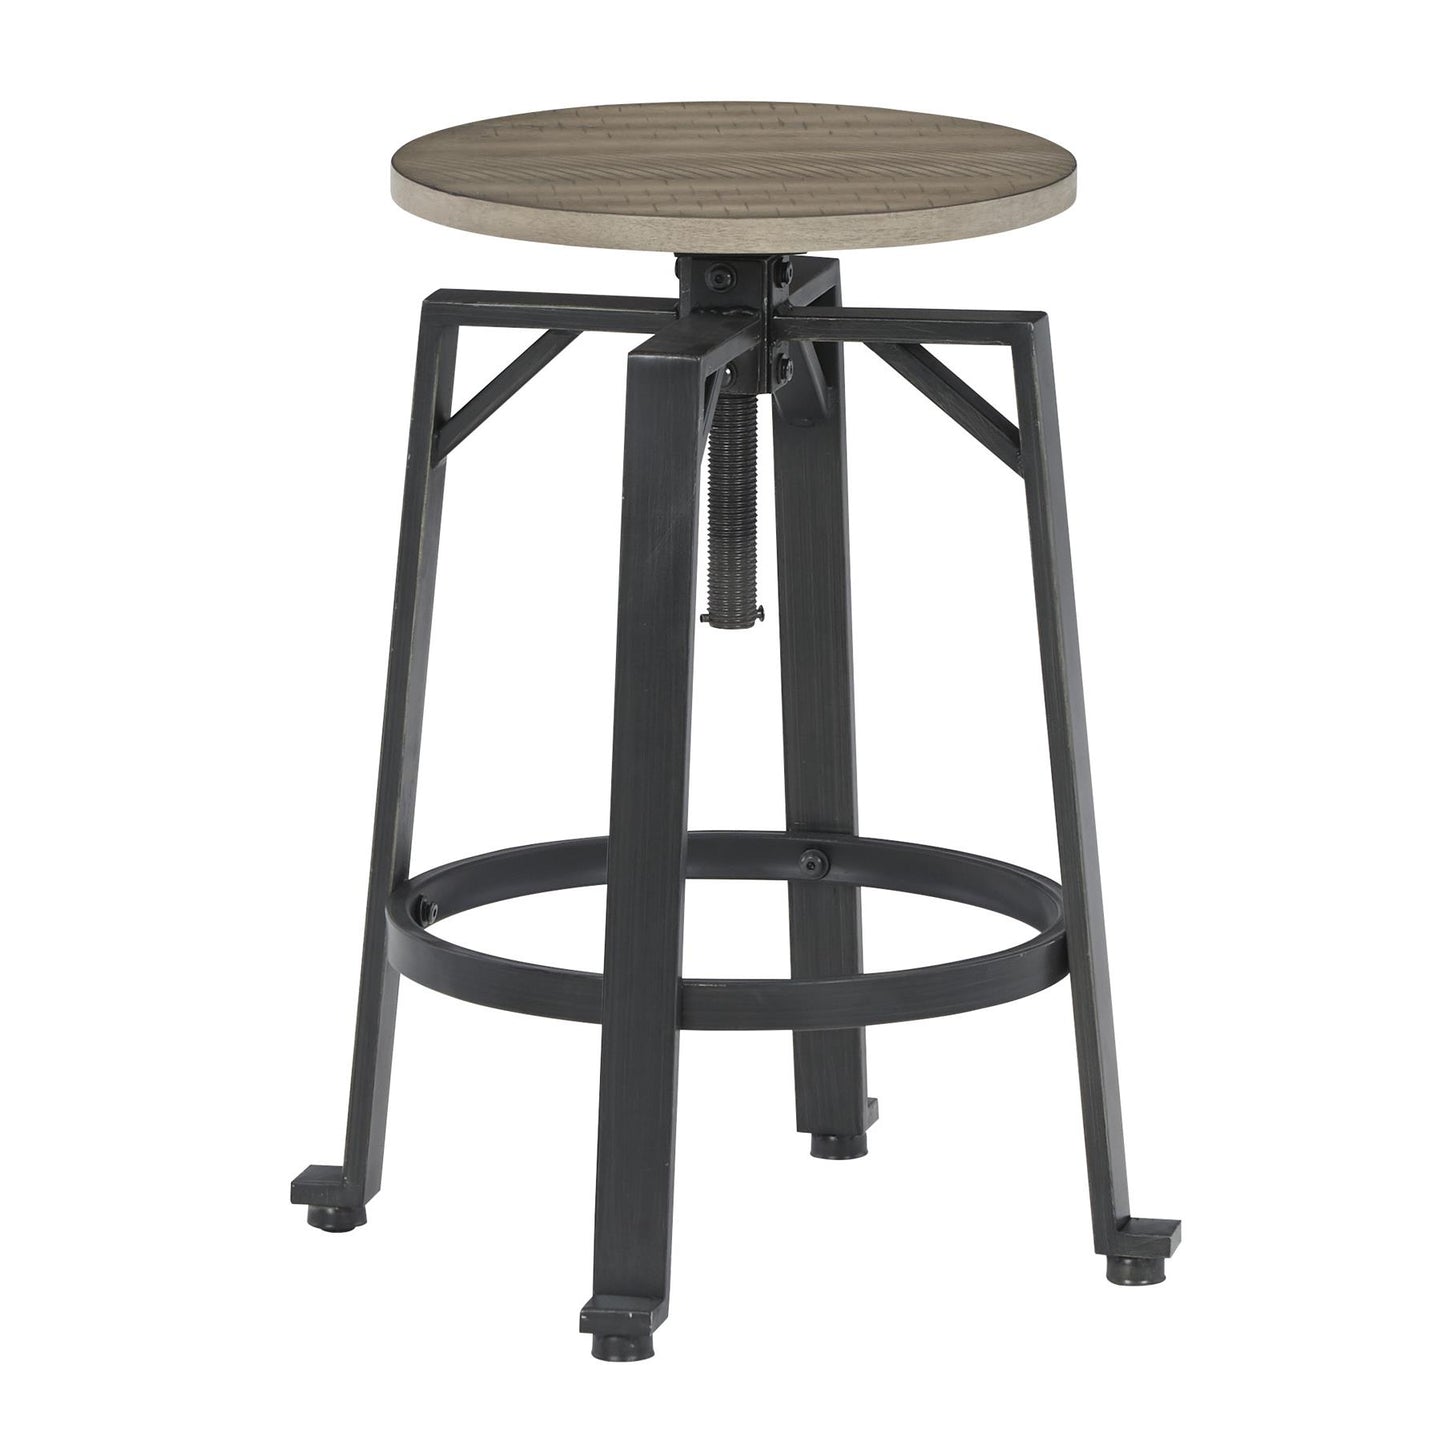 Signature Design by Ashley Lesterton Adjustable Height Stool D334-024 IMAGE 1